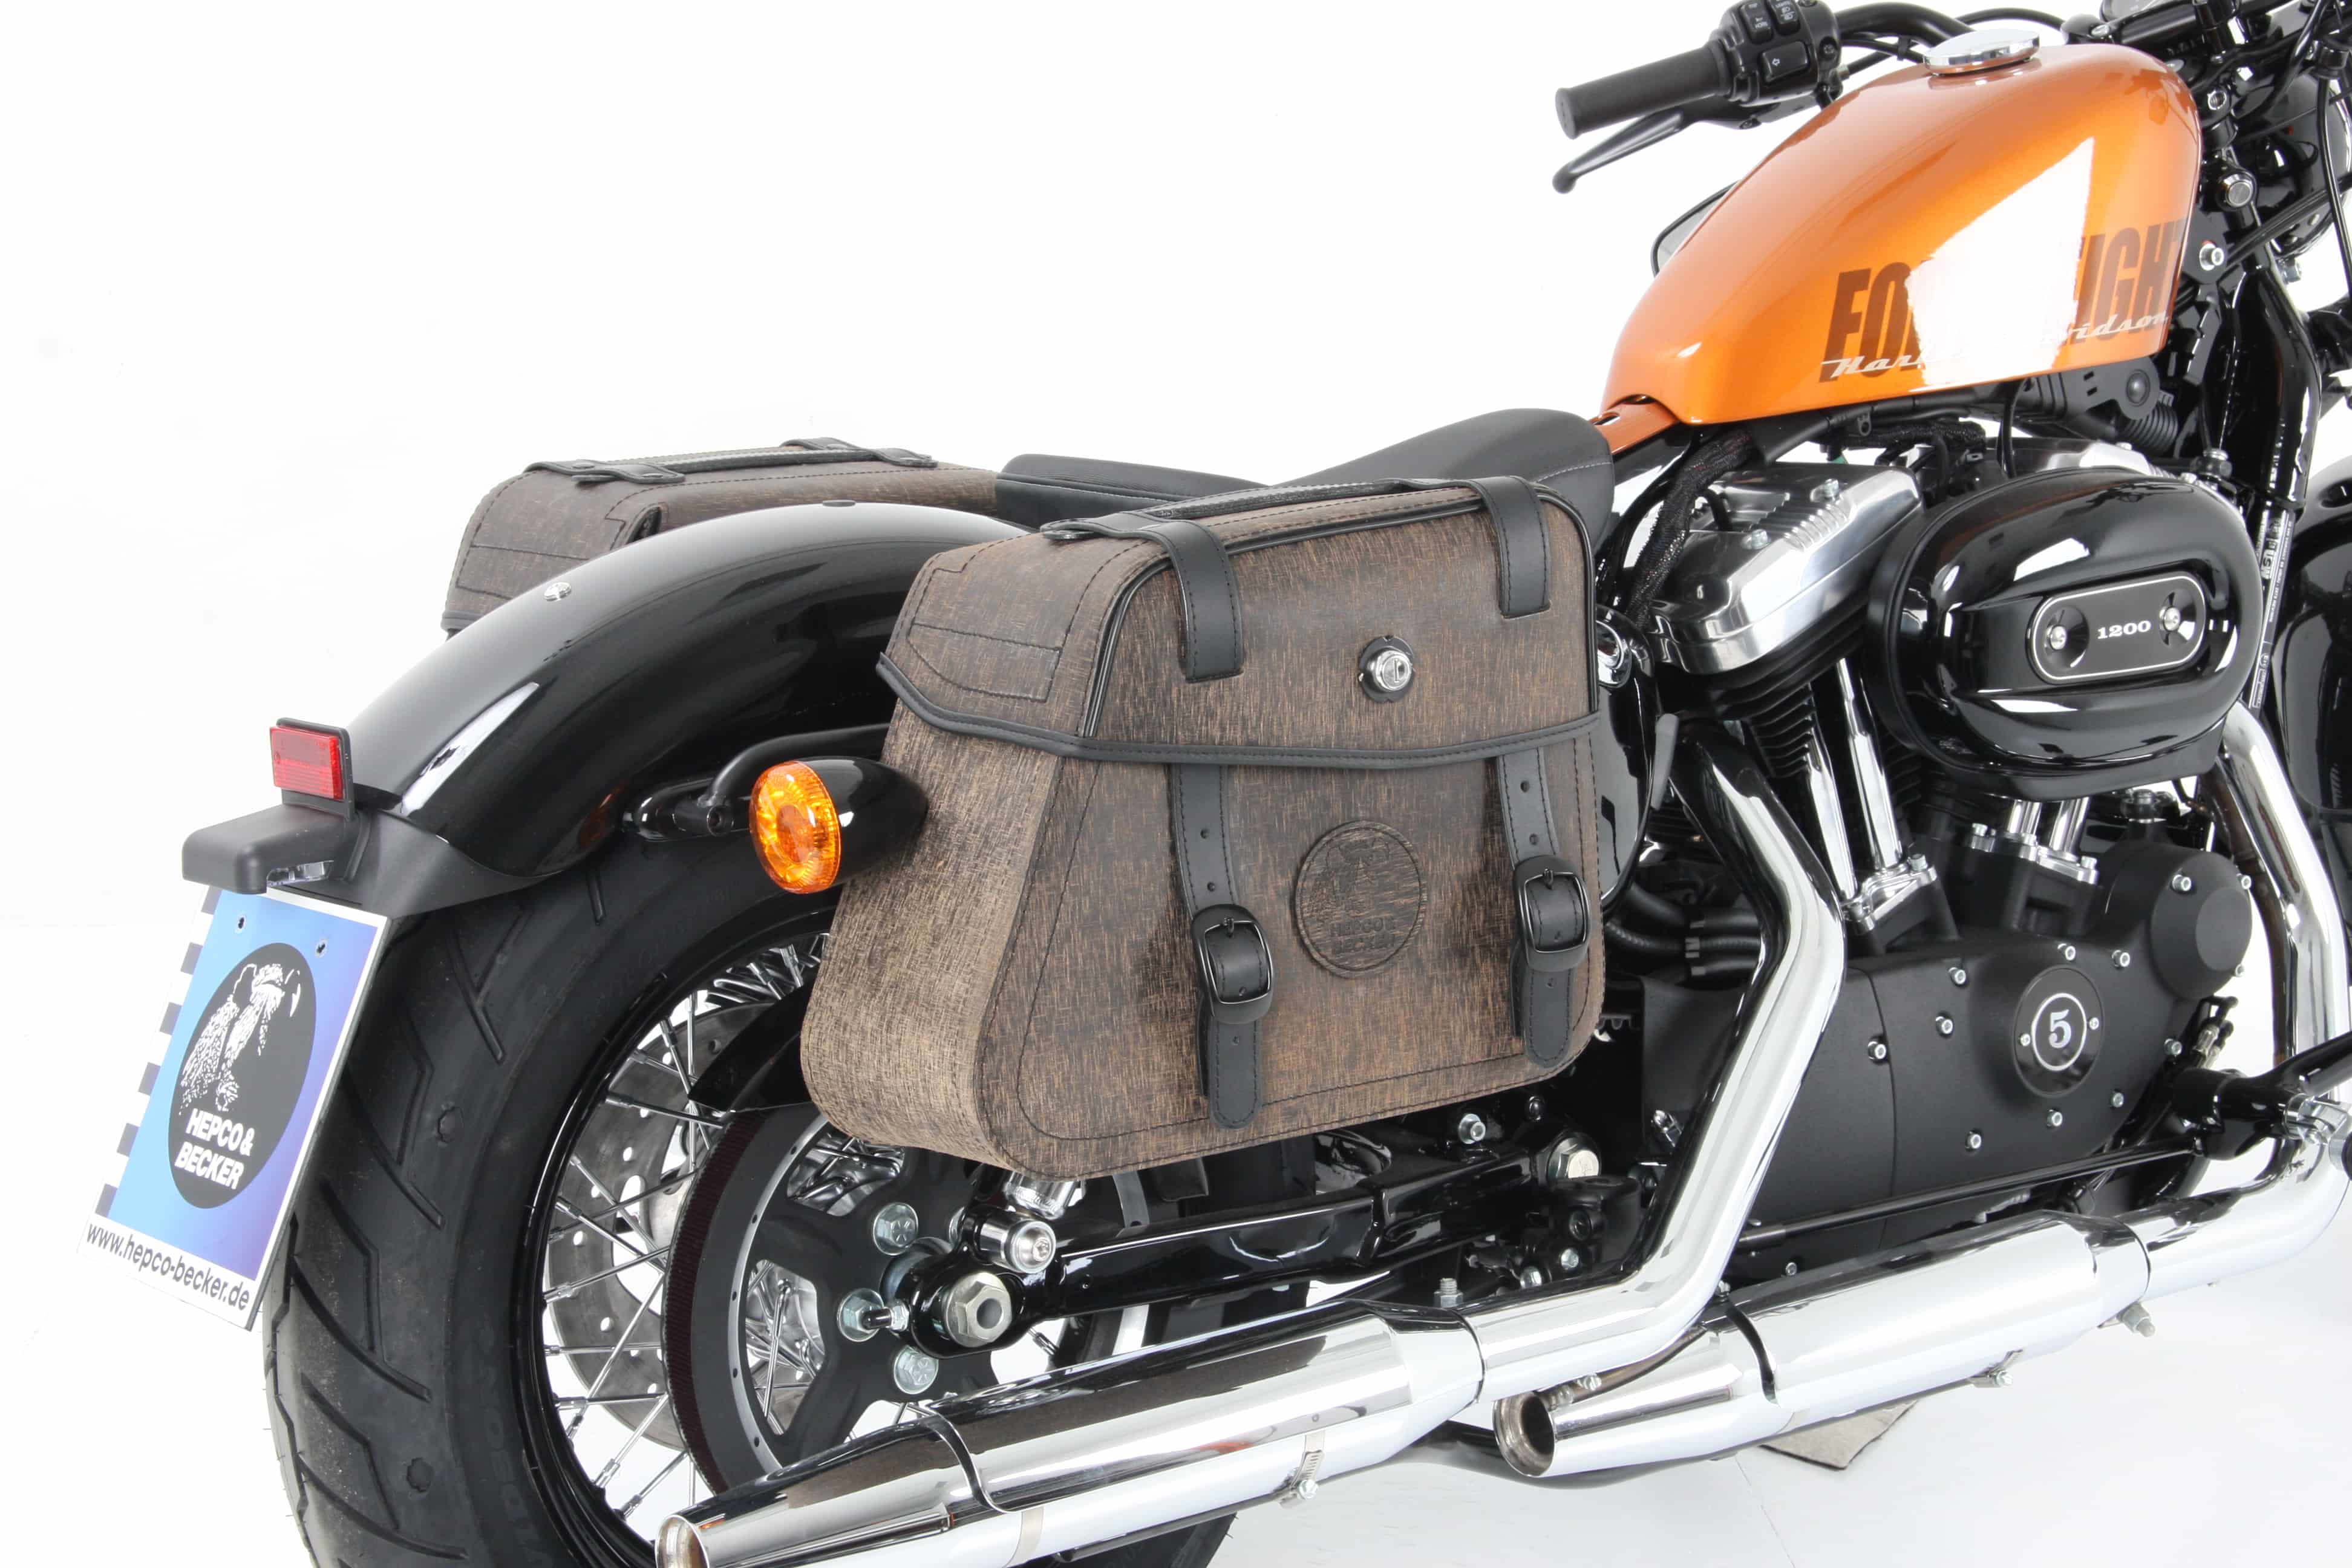 Harley Sportster Bags | peacecommission.kdsg.gov.ng